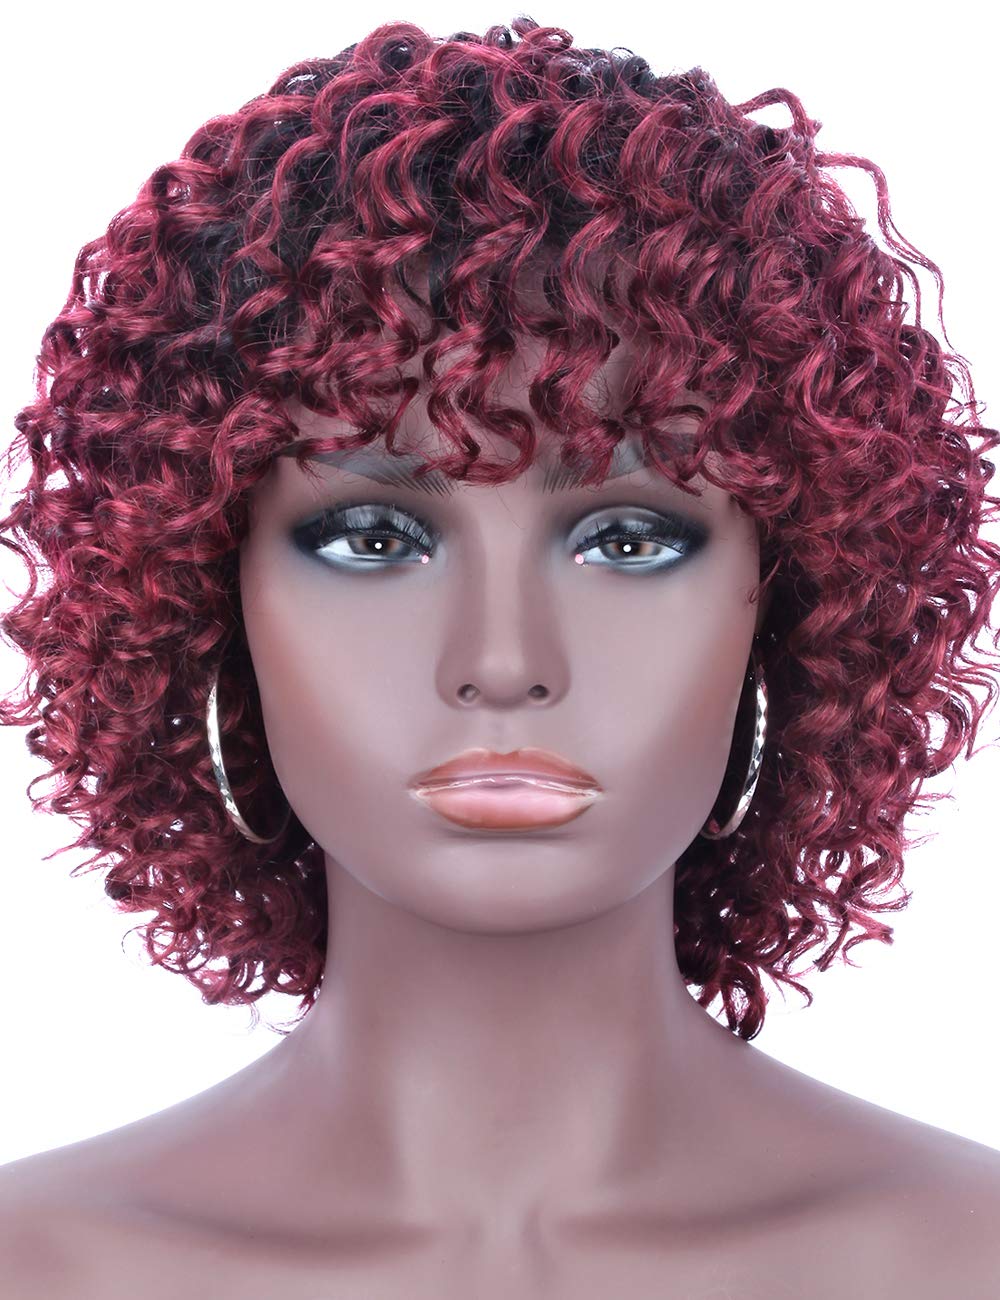 Short Ombre Wine Red Curly Brazilian Remy 100% Human Hair Wigs for Black Women Full Head Wave Curls Wig with Hair Bangs